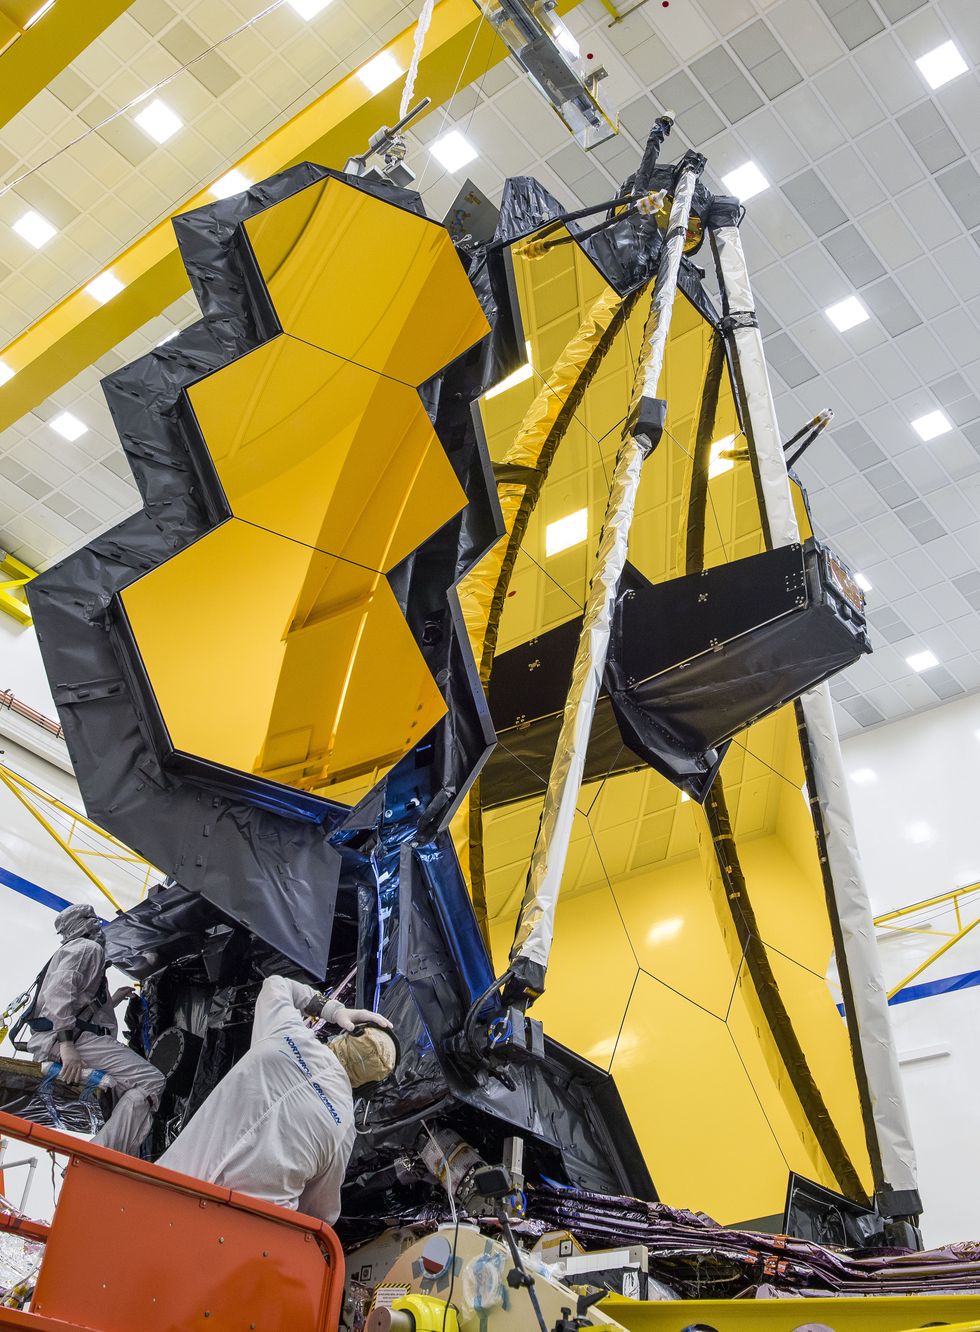 NASA's James Webb Telescope Spreads Its Reflective Wings for the First Time